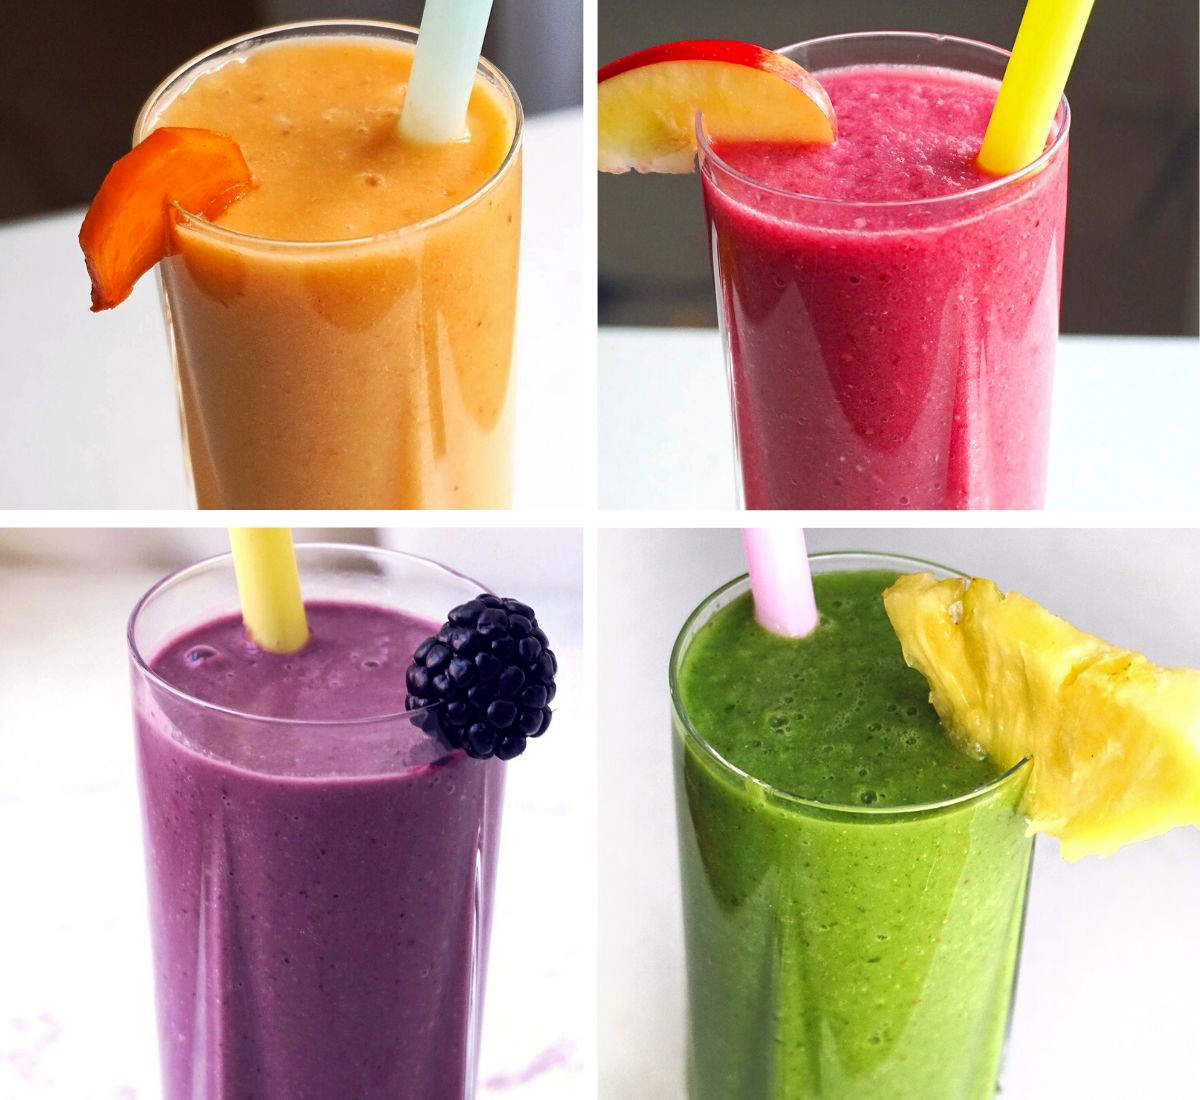 Plant bases smoothies without dairy milk or yogurt.